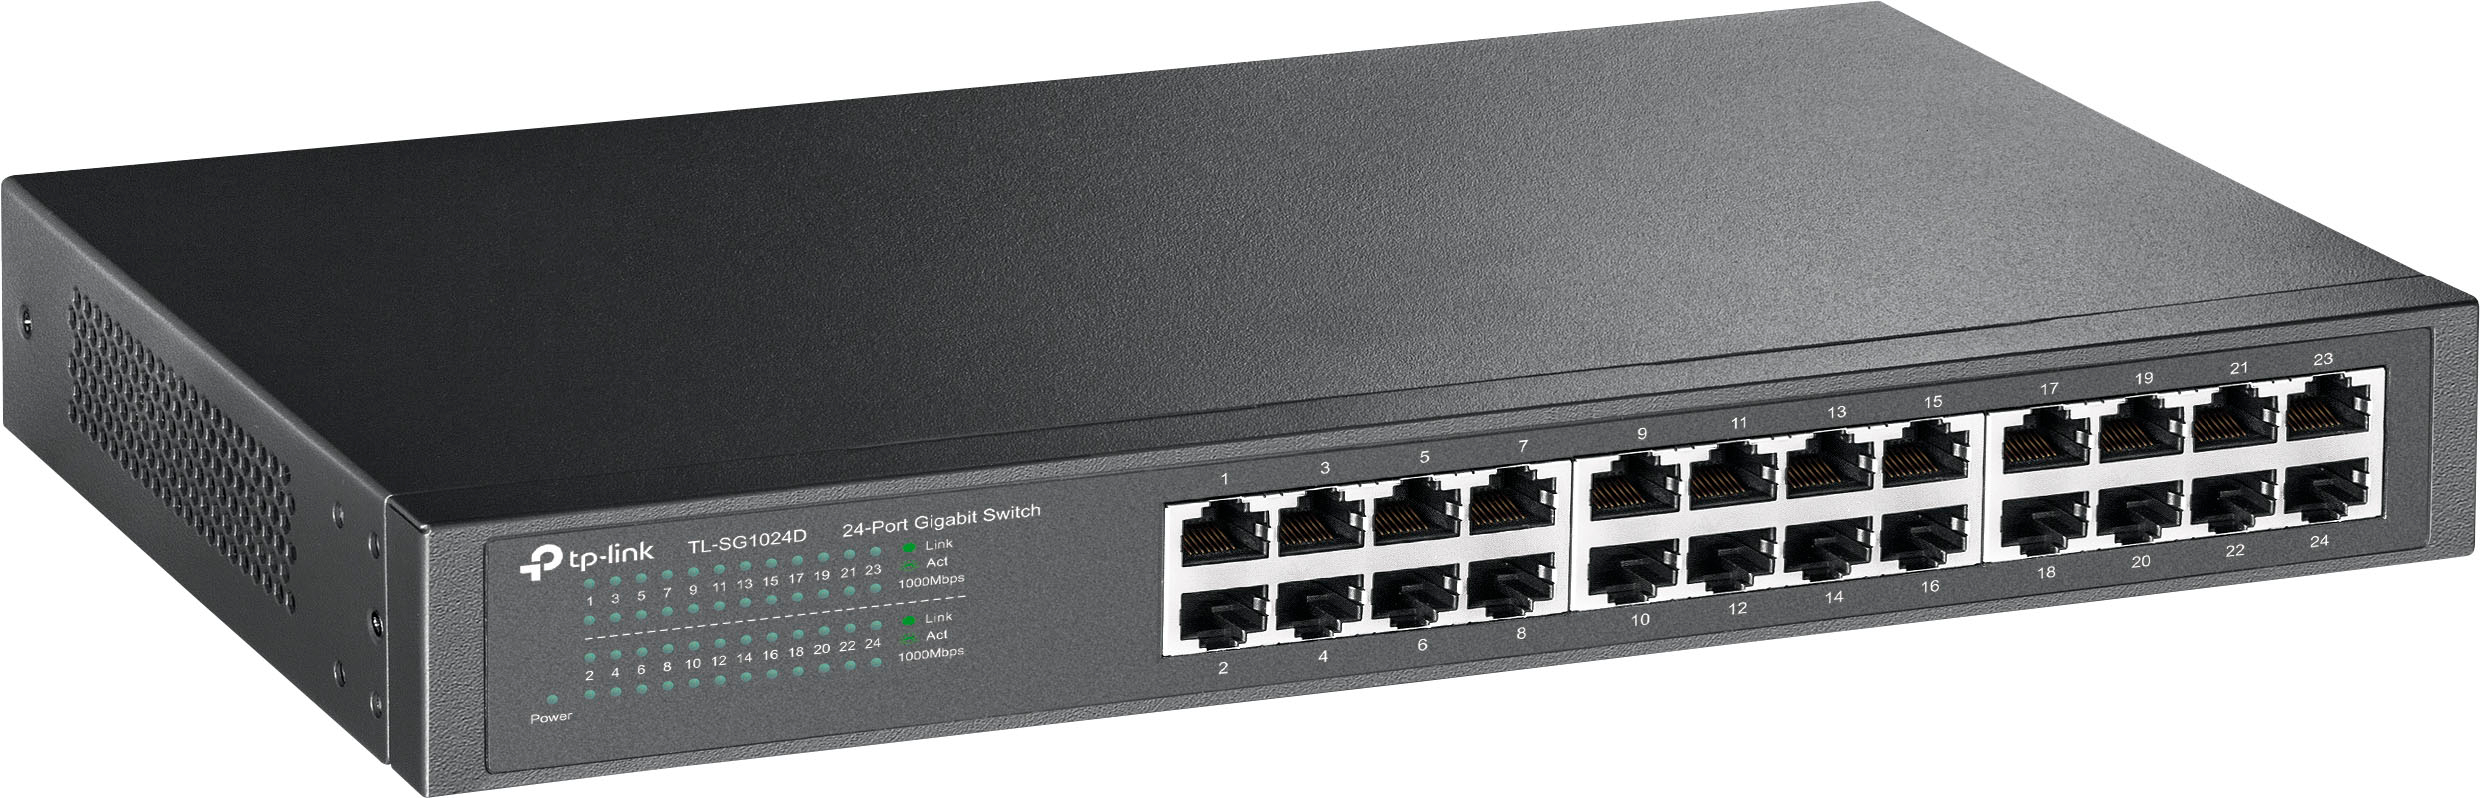 Top 10 Best TP-Link Network Switches For Your Business